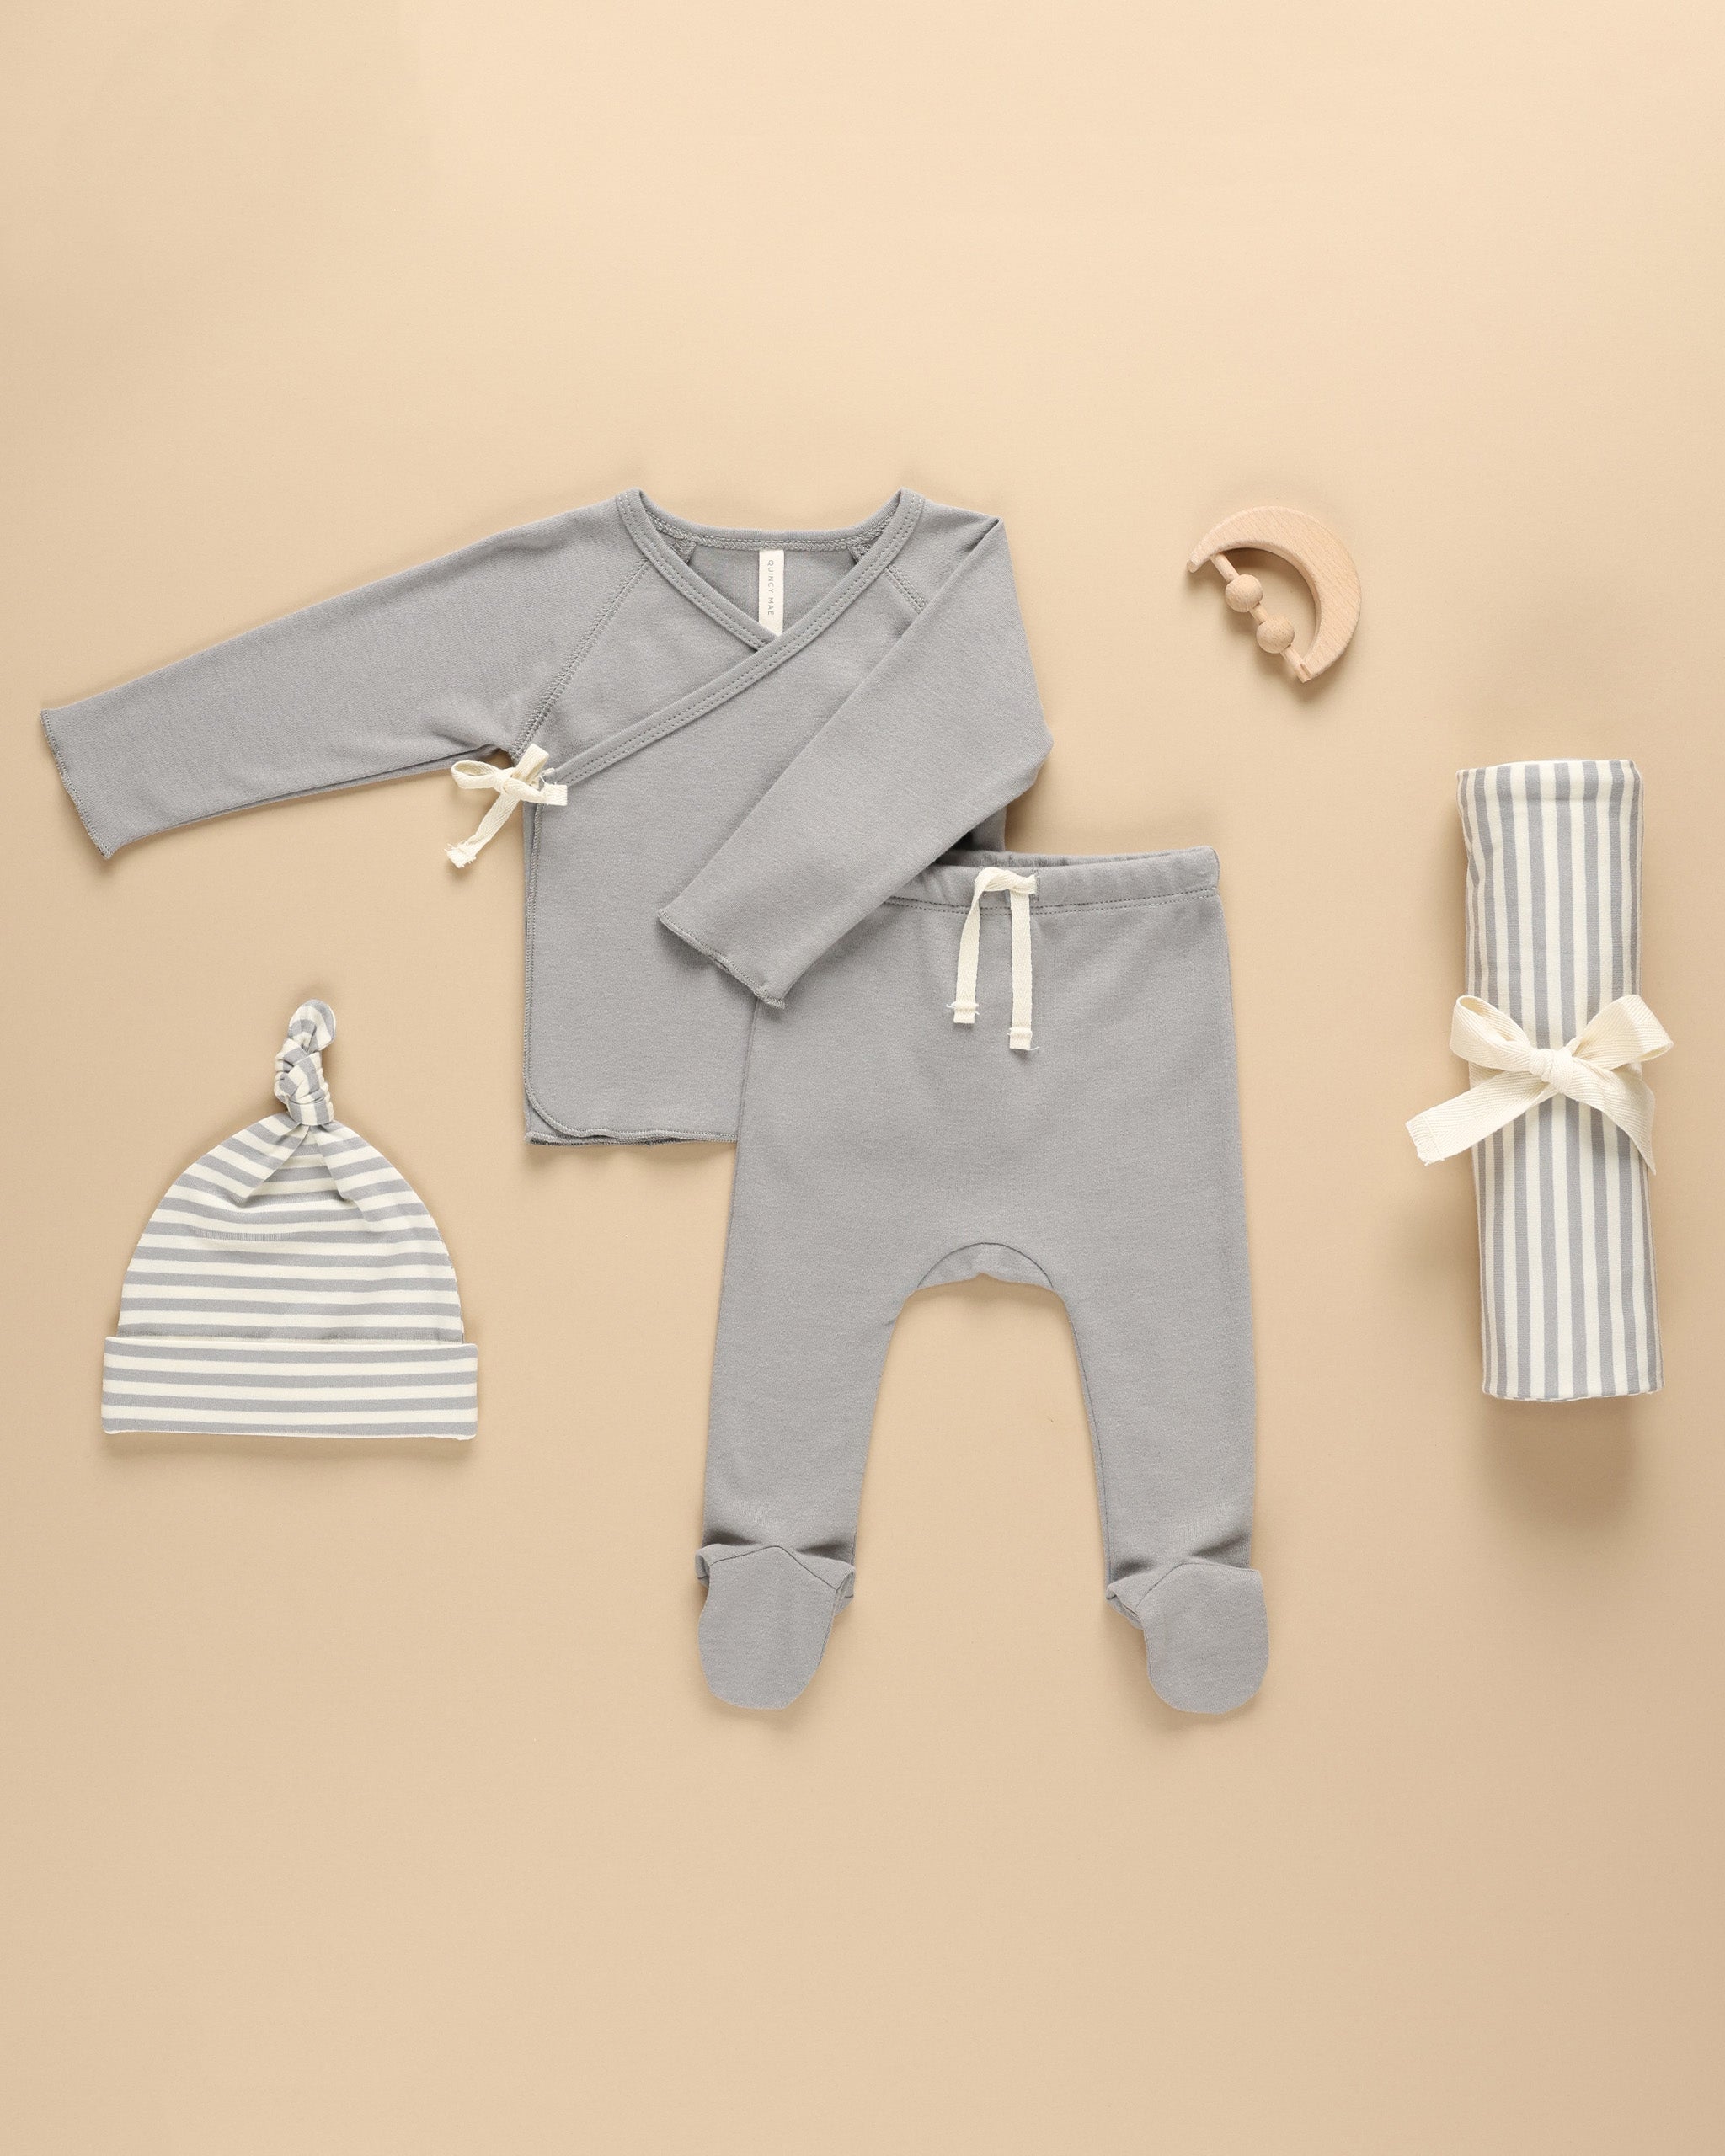 Wrap Top + Footed Pant Set || Dusty Blue - Rylee + Cru | Kids Clothes | Trendy Baby Clothes | Modern Infant Outfits |